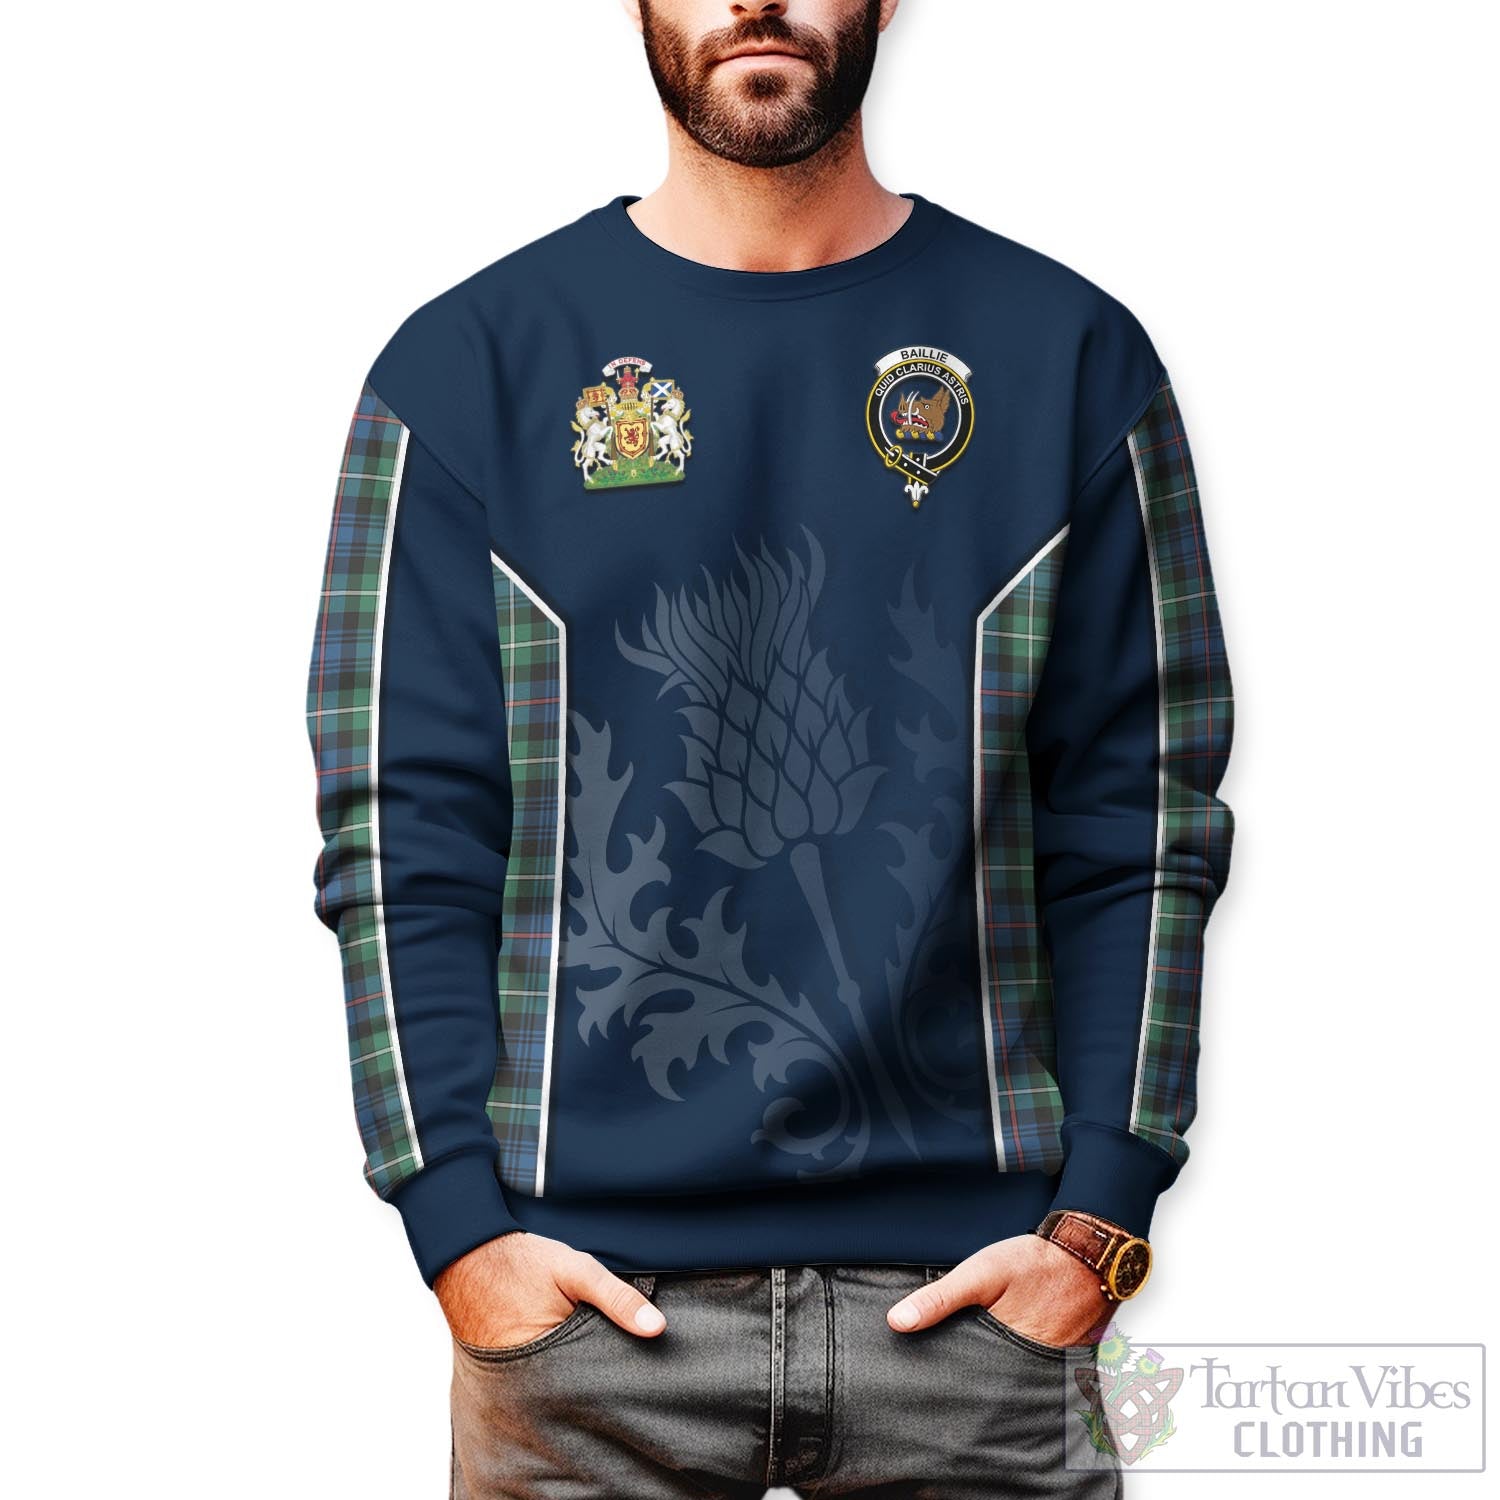 Tartan Vibes Clothing Baillie Ancient Tartan Sweatshirt with Family Crest and Scottish Thistle Vibes Sport Style